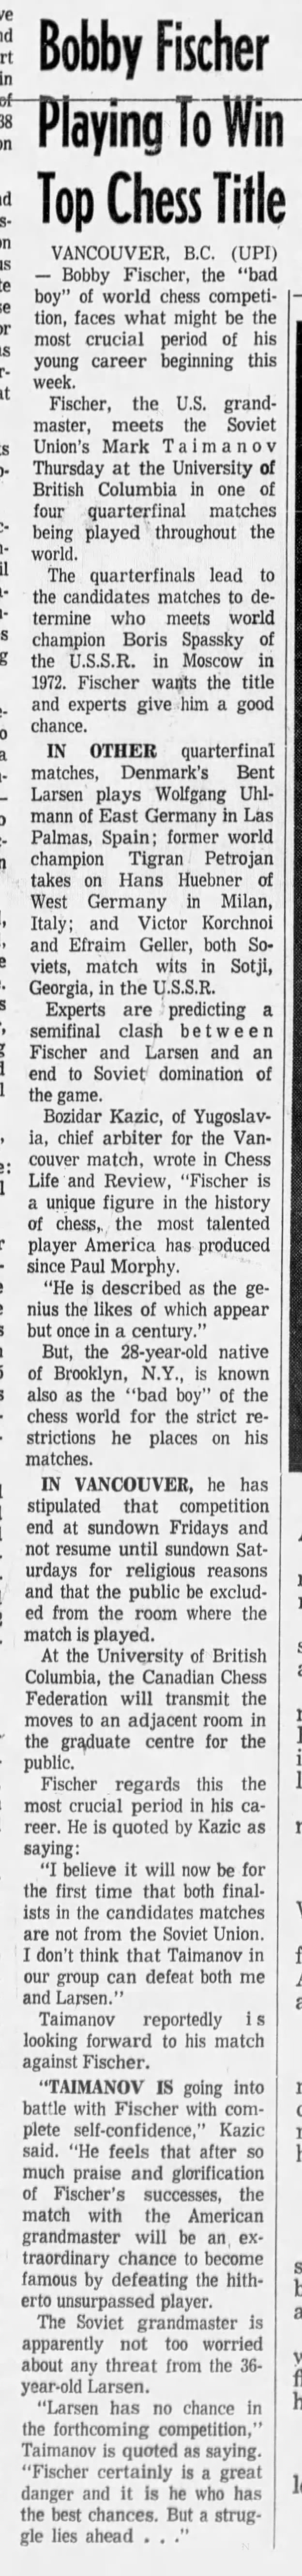 Bobby Fischer Playing To Win Top Chess Title